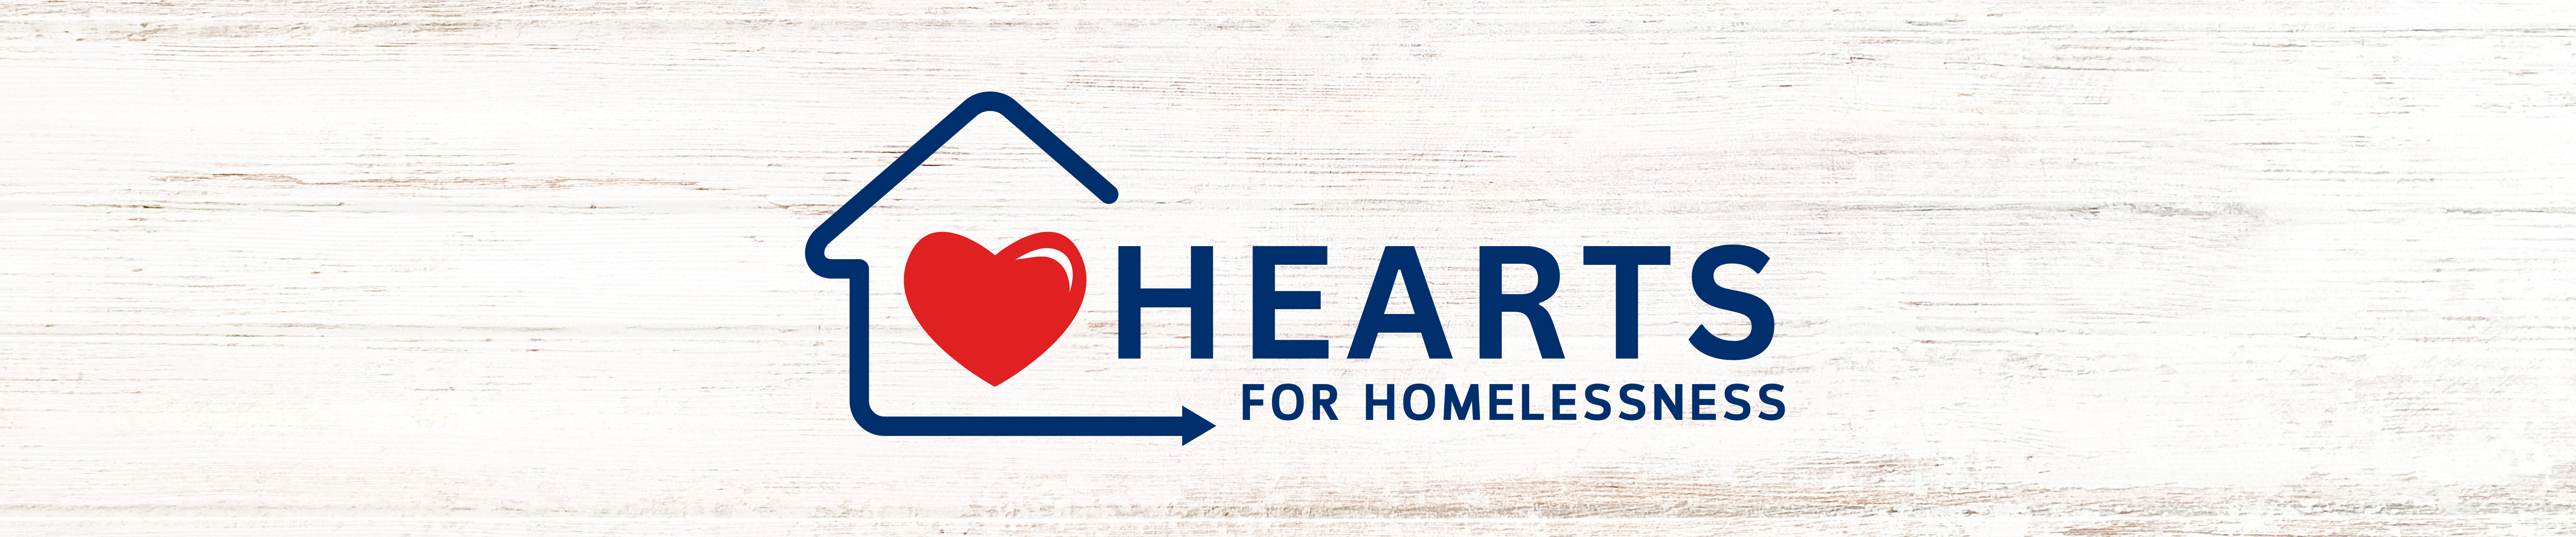 Hearts for Homelessness